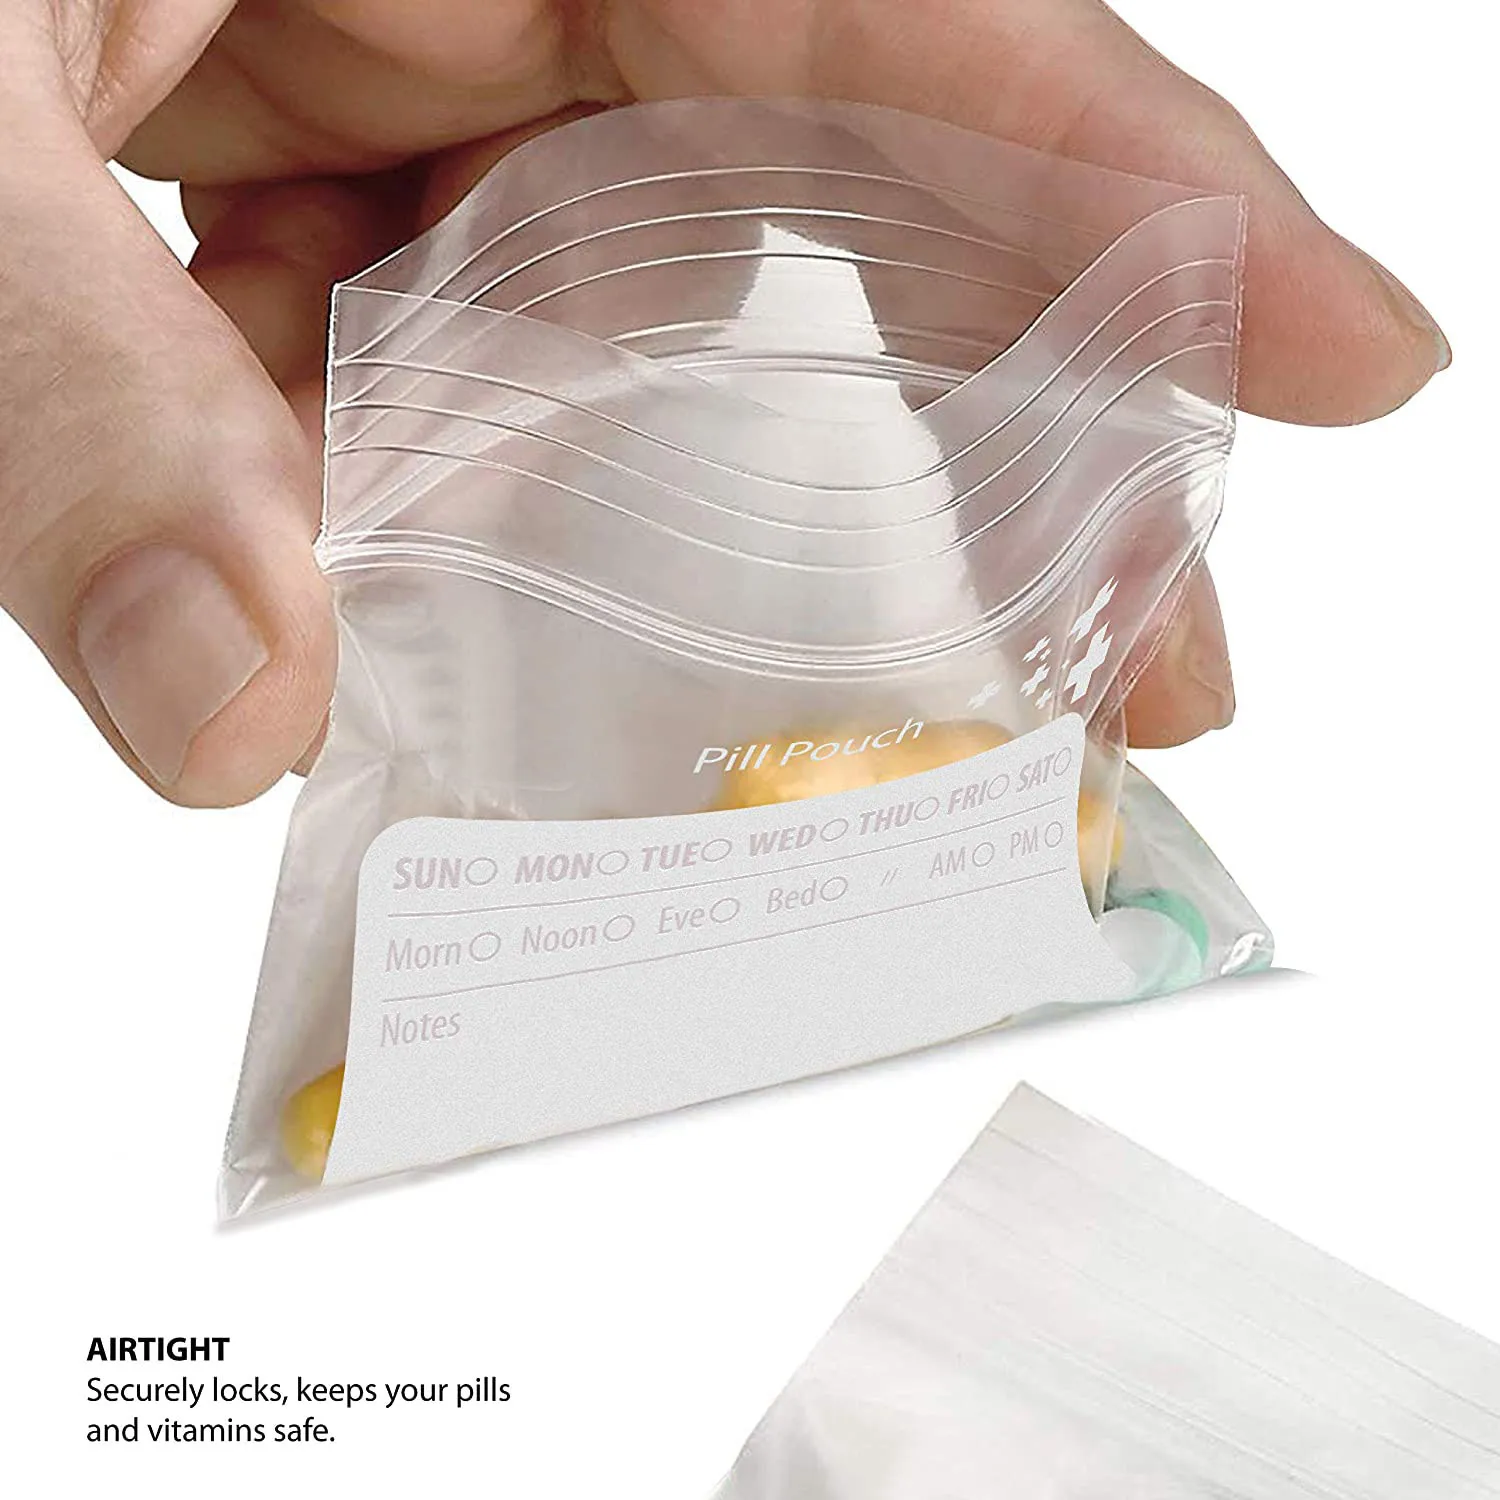 Source Plastic Zipper Pharmacy Bag Reusable bag Ziplock Pill Pouch Bags for  Medicine/pills/ drugs with Write-on Labels on m.